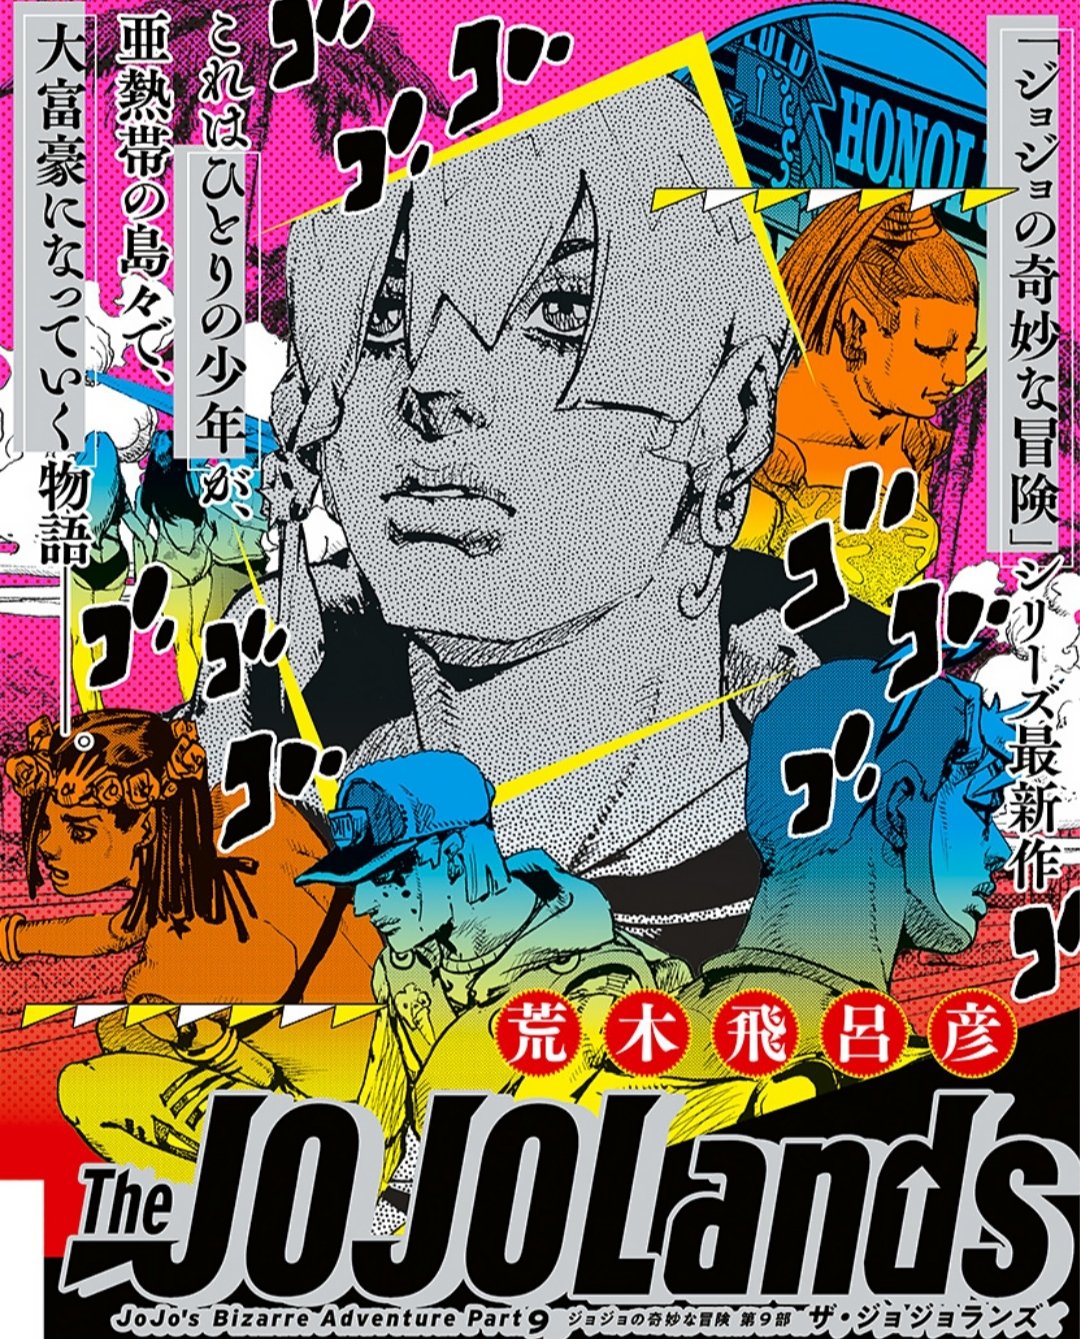 The JOJOLands is here! on X: Day 215: JoJo's Bizarre Adventure Part 9:  JoJolands (tentatively) is confirmed, but not the publication start date.  This guy is cool as fuck.  / X